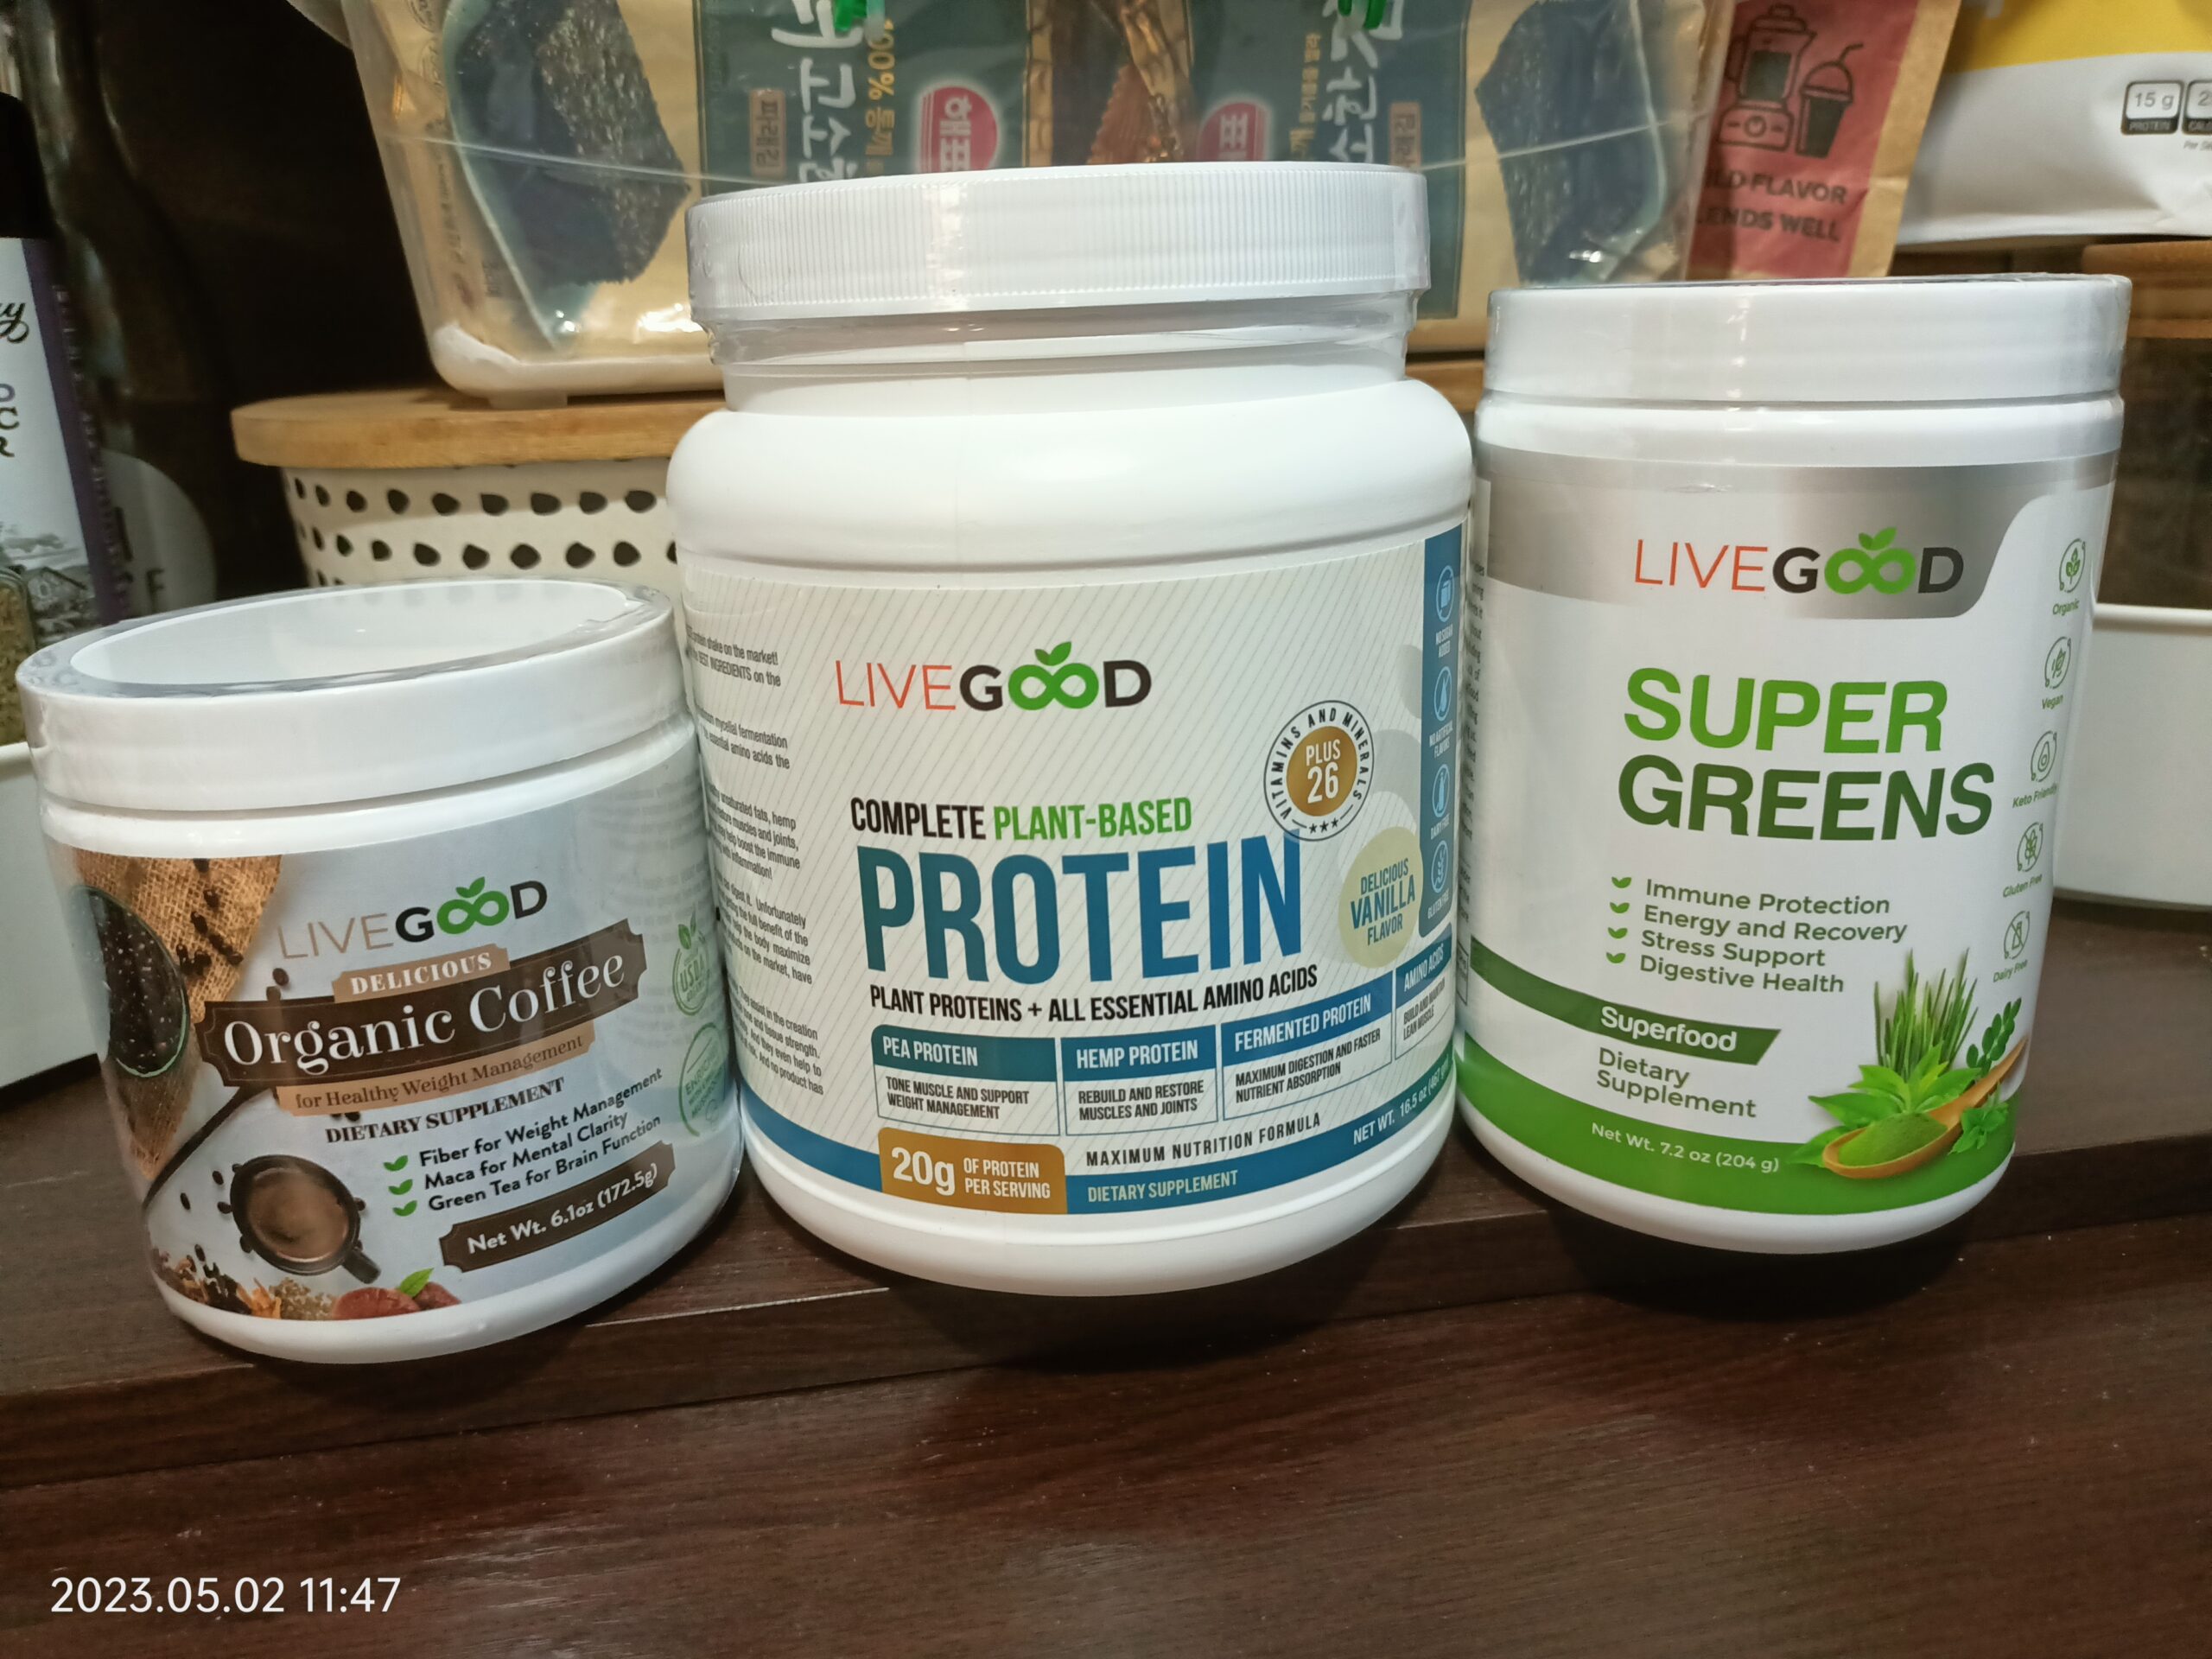 live good products organic coffee complete plant-based protein super greens